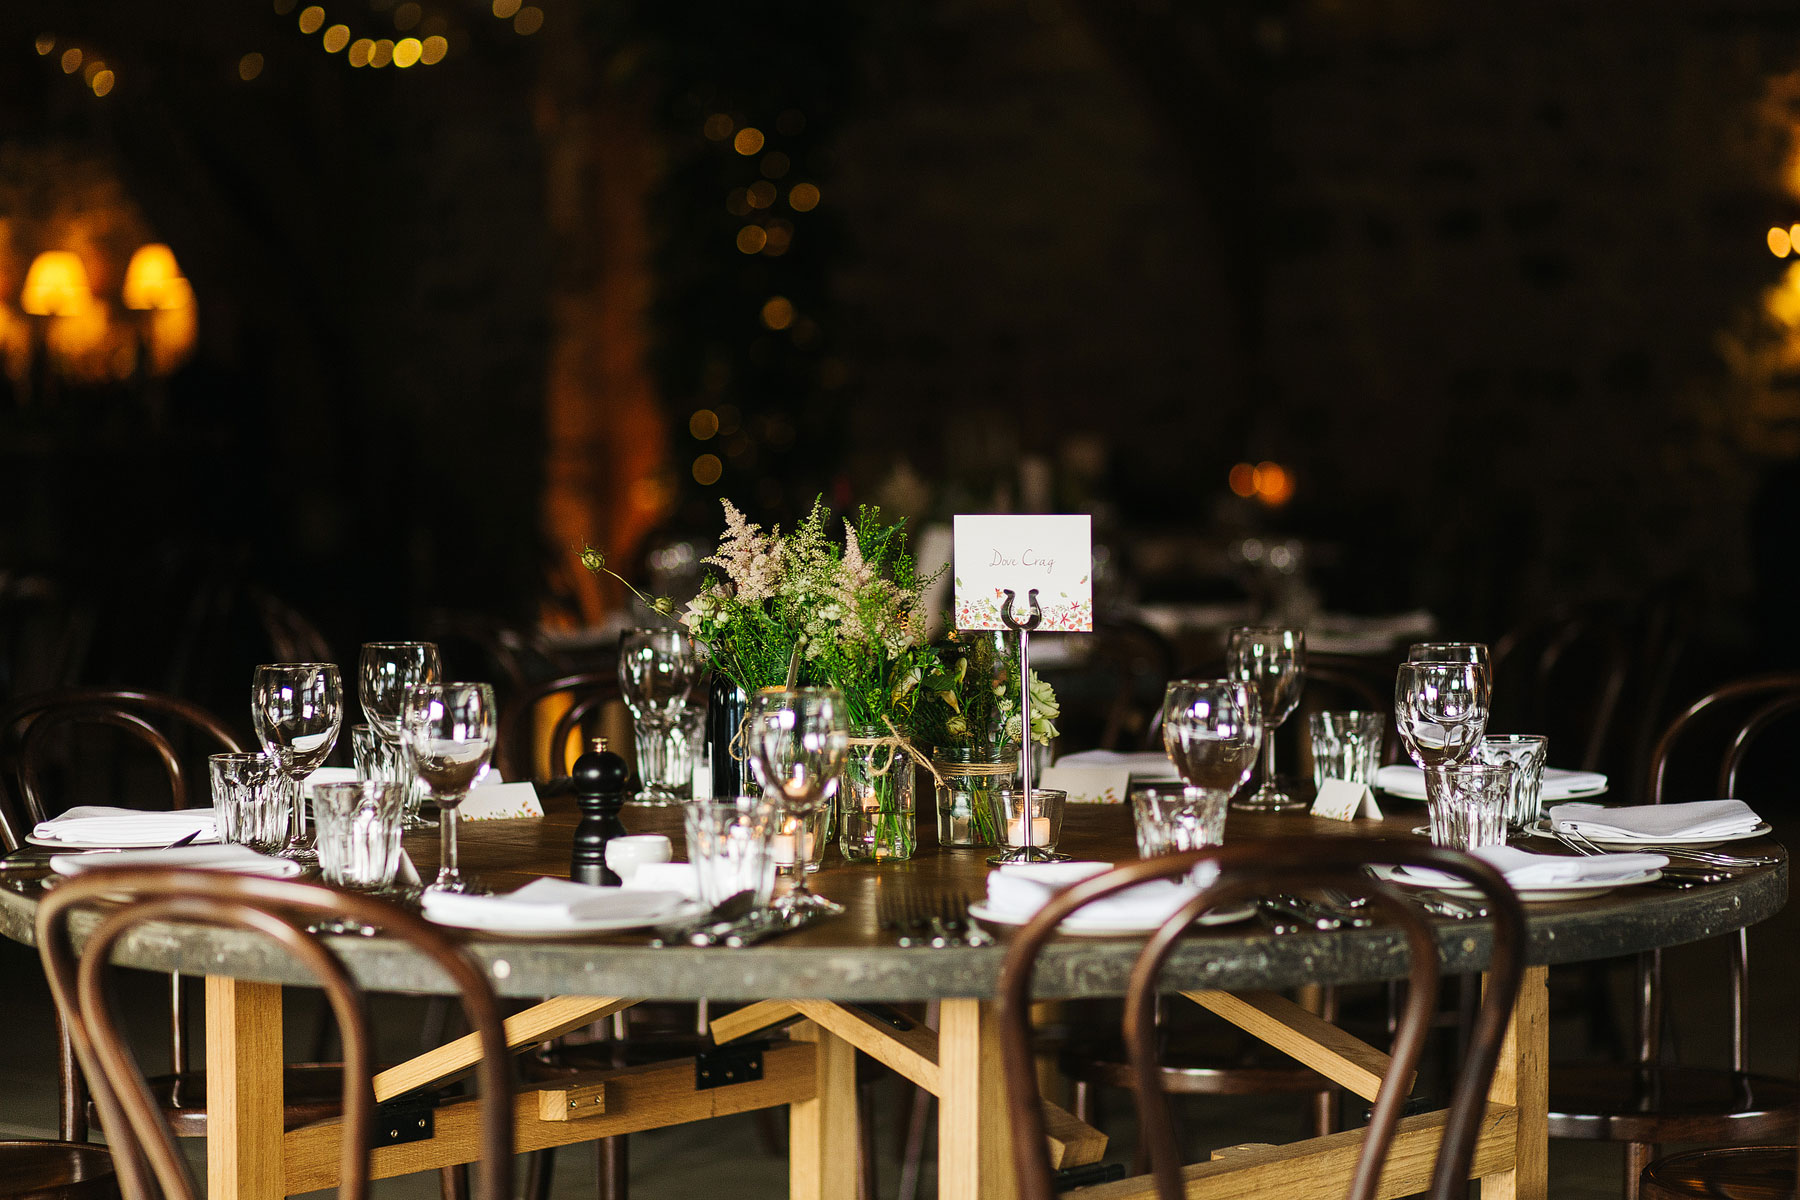 tithe barn at bolton abbey table details